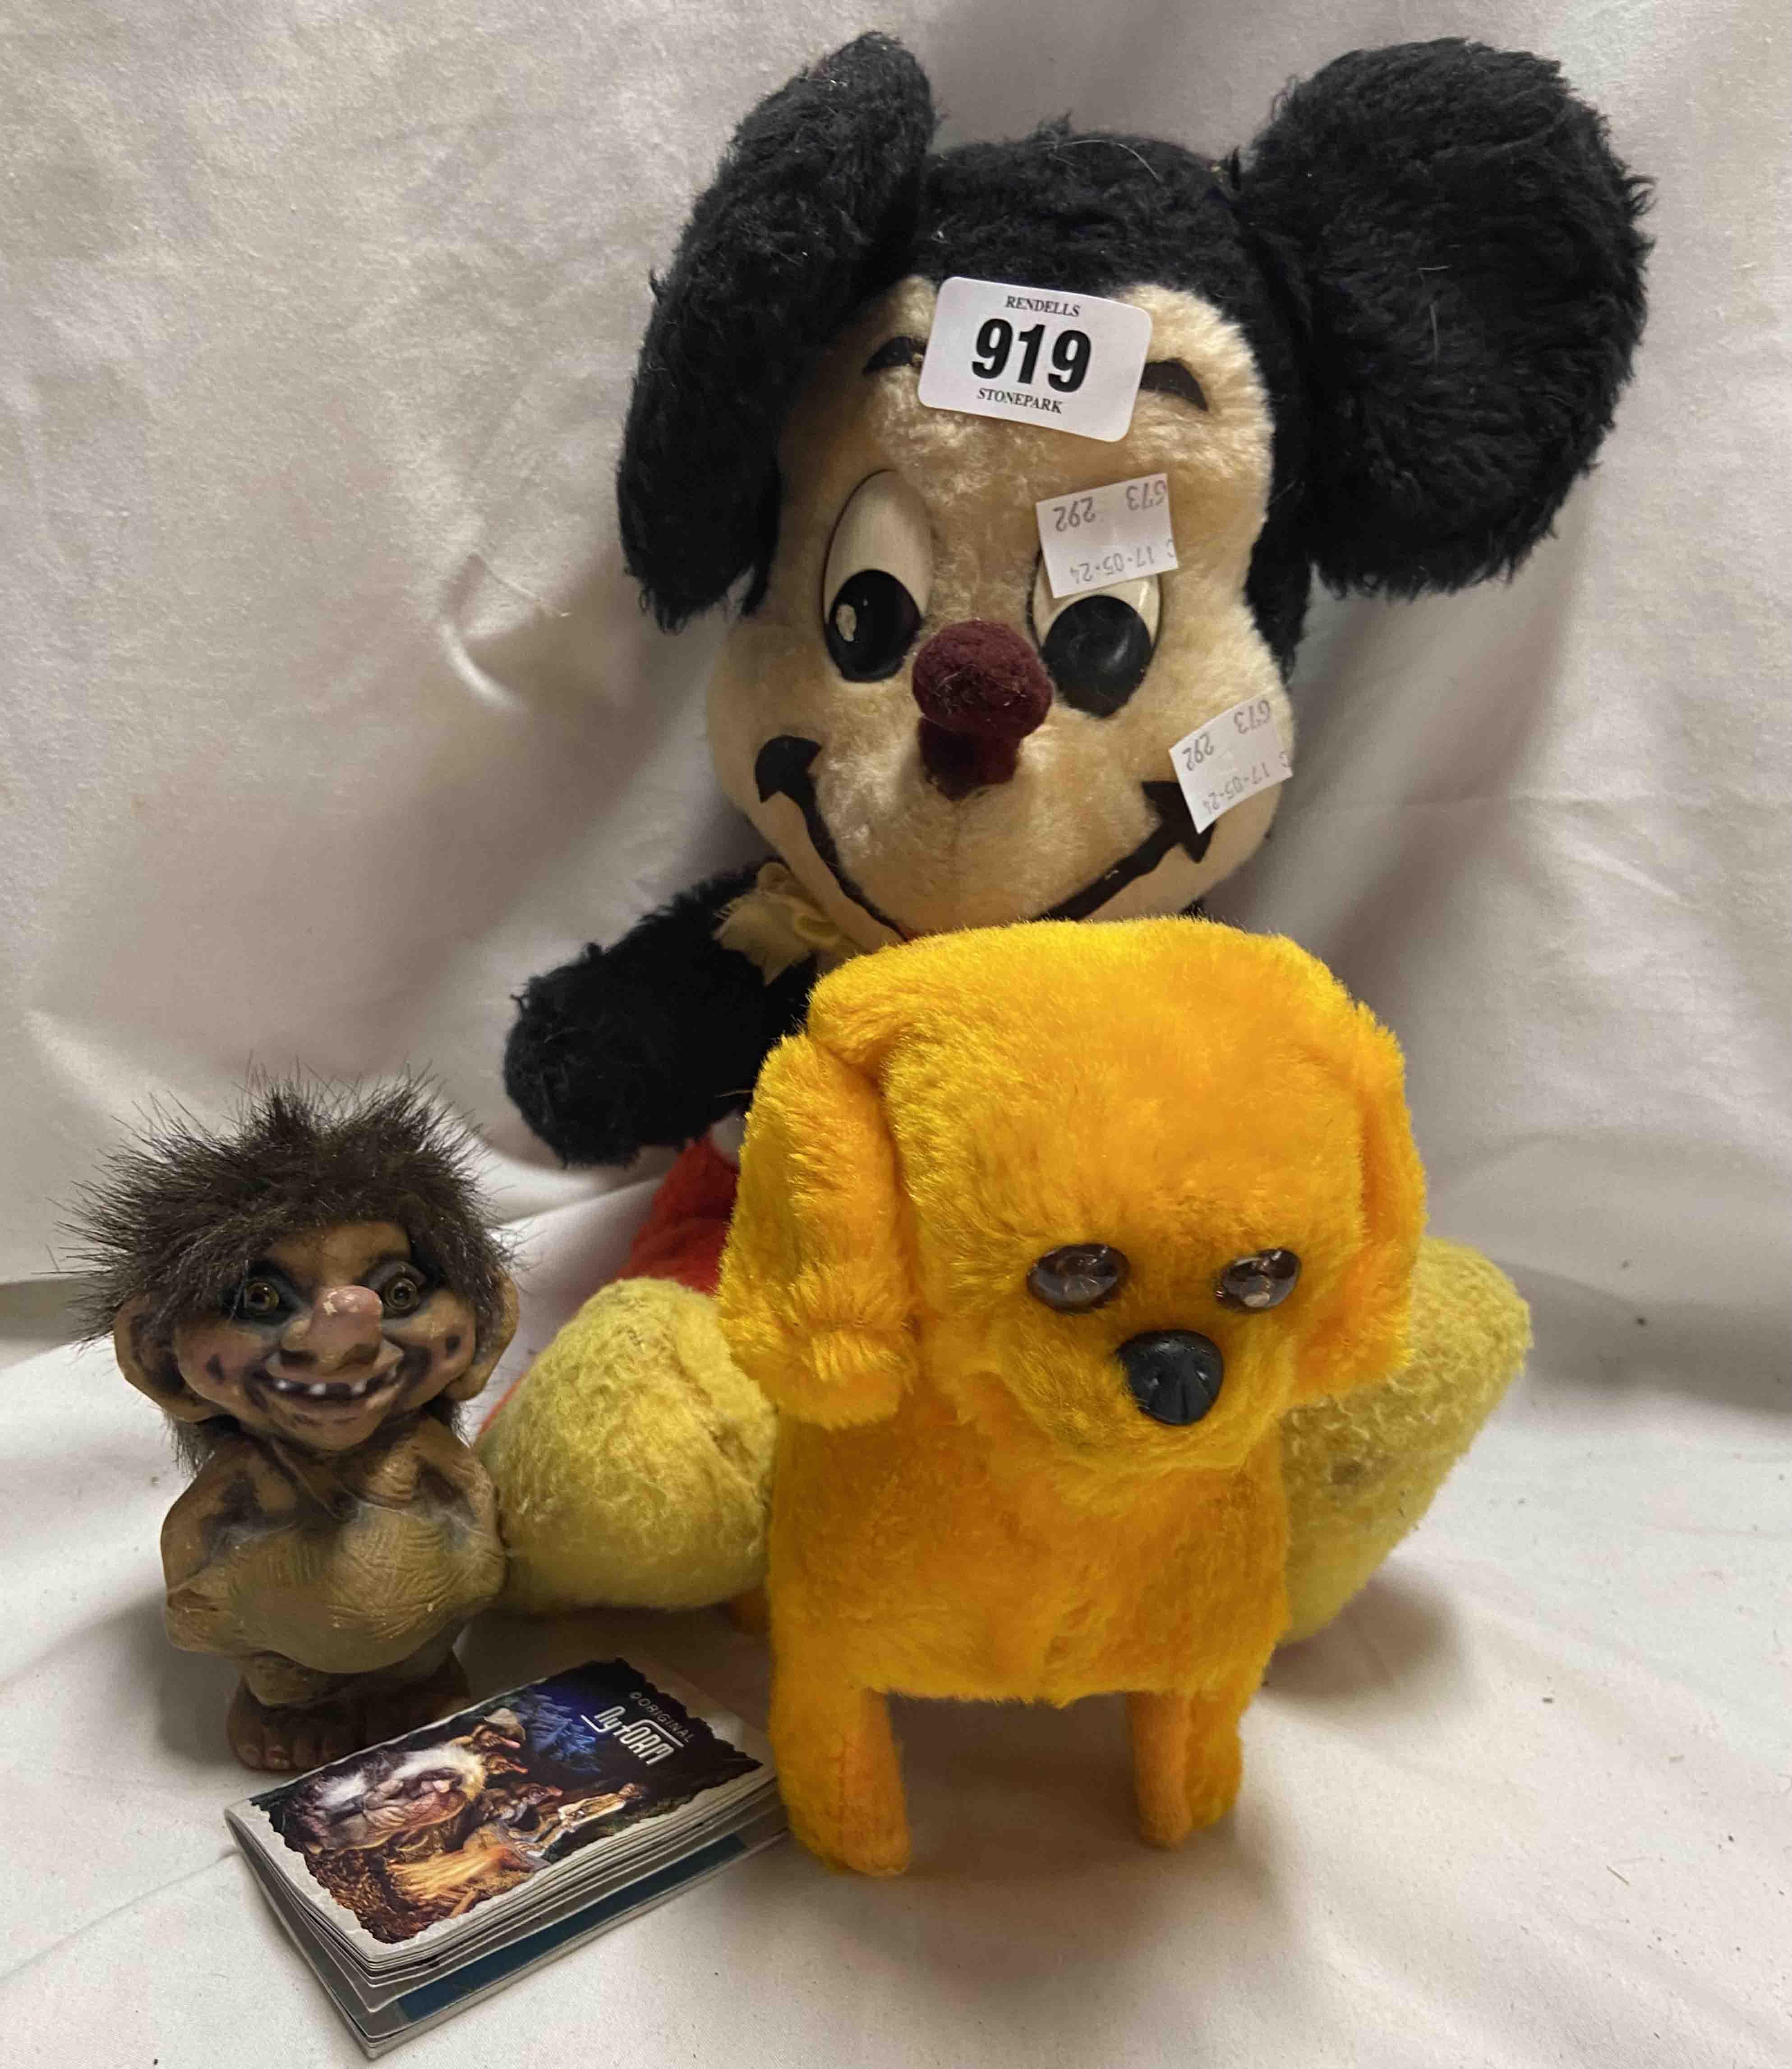 A vintage Mickey Mouse toy - sold with a yellow battery powered dog and a Nyform troll